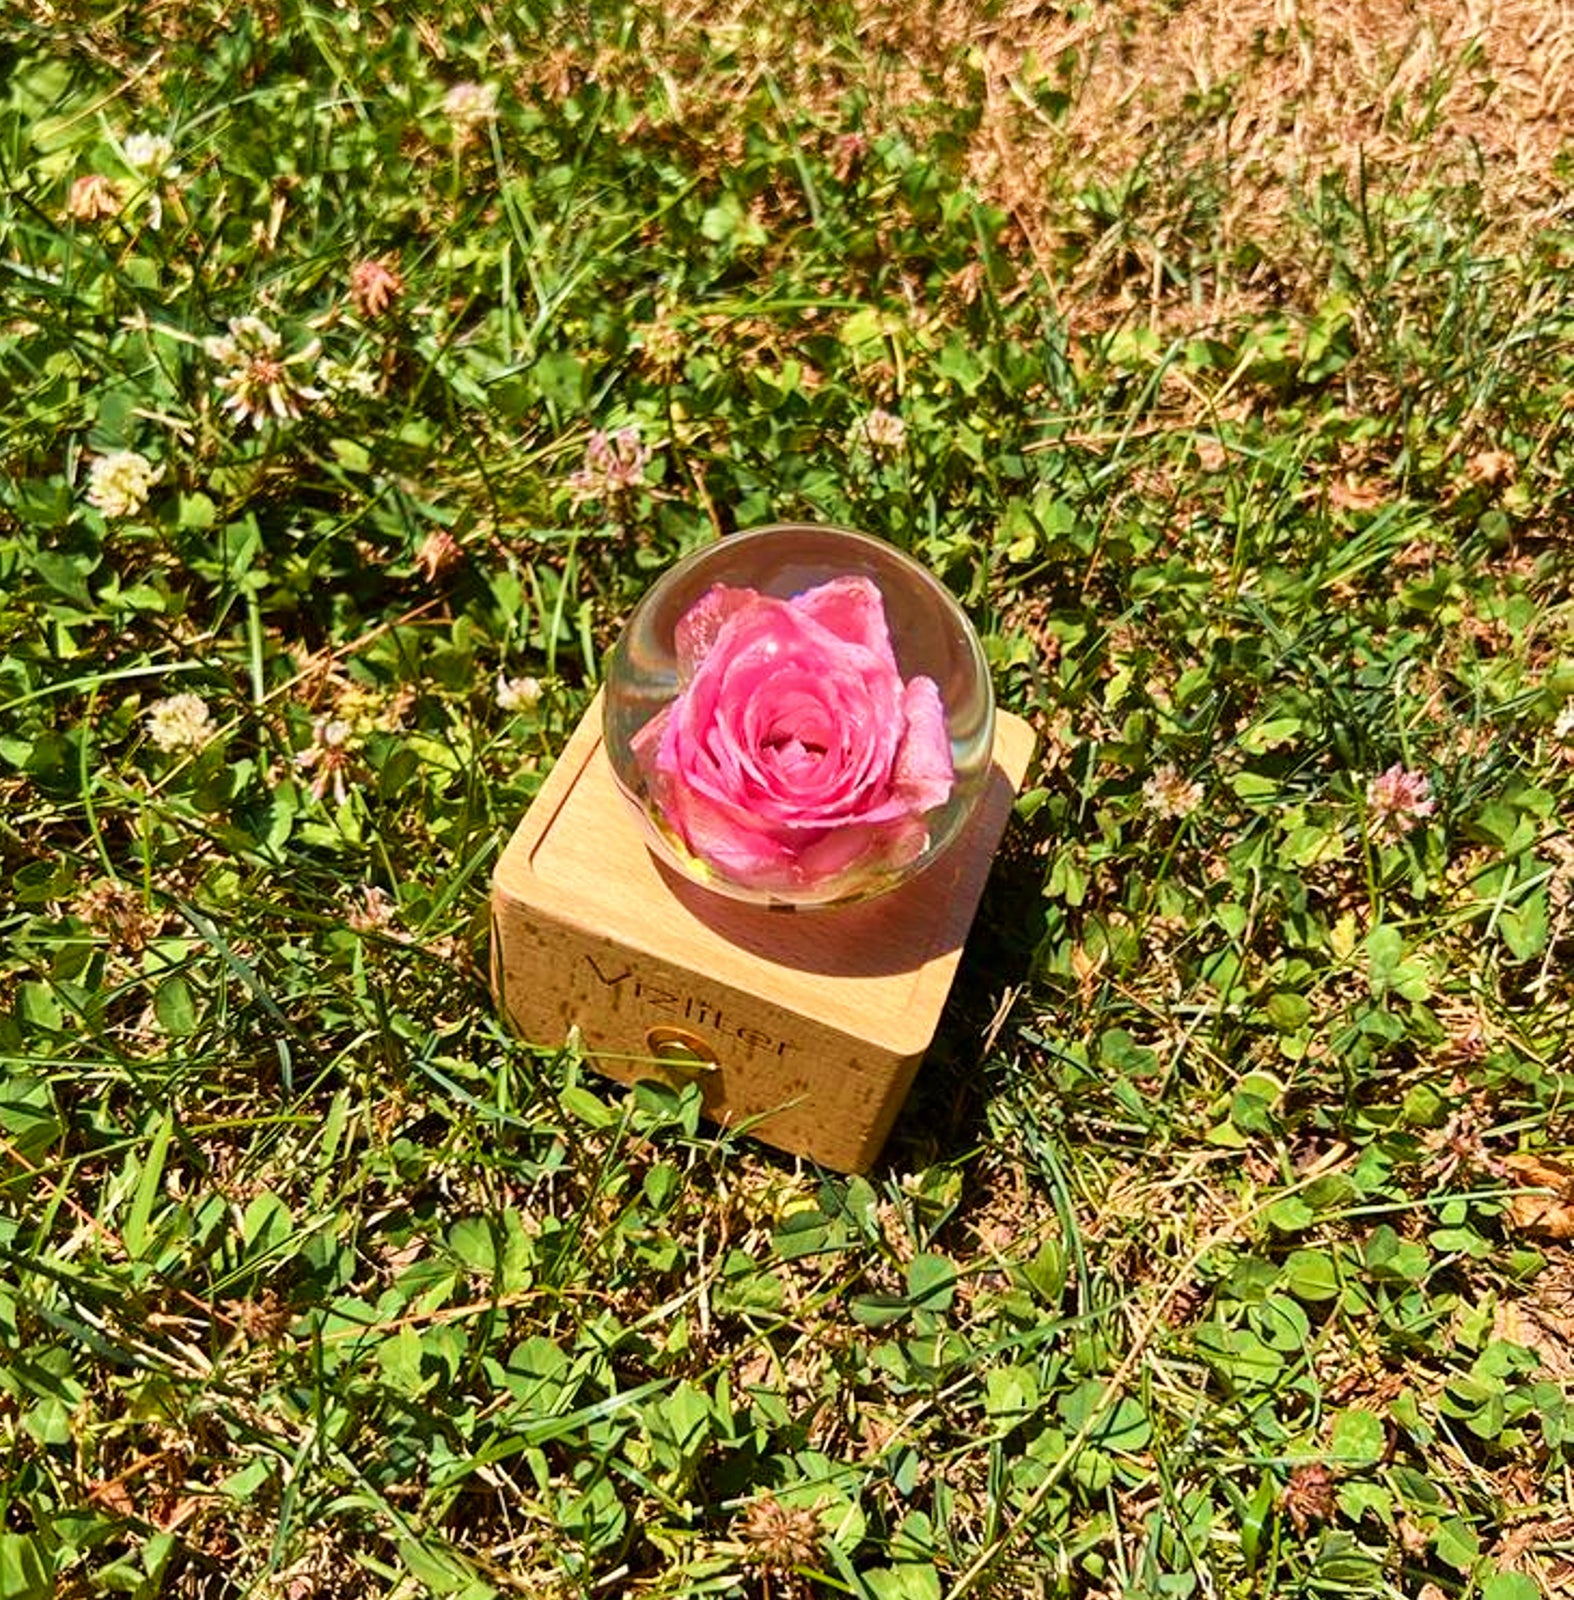 Bluetooth Speakers Crystal Ball LED Light Preserved Fresh Flower with Wood Base Night Light Pink Rose